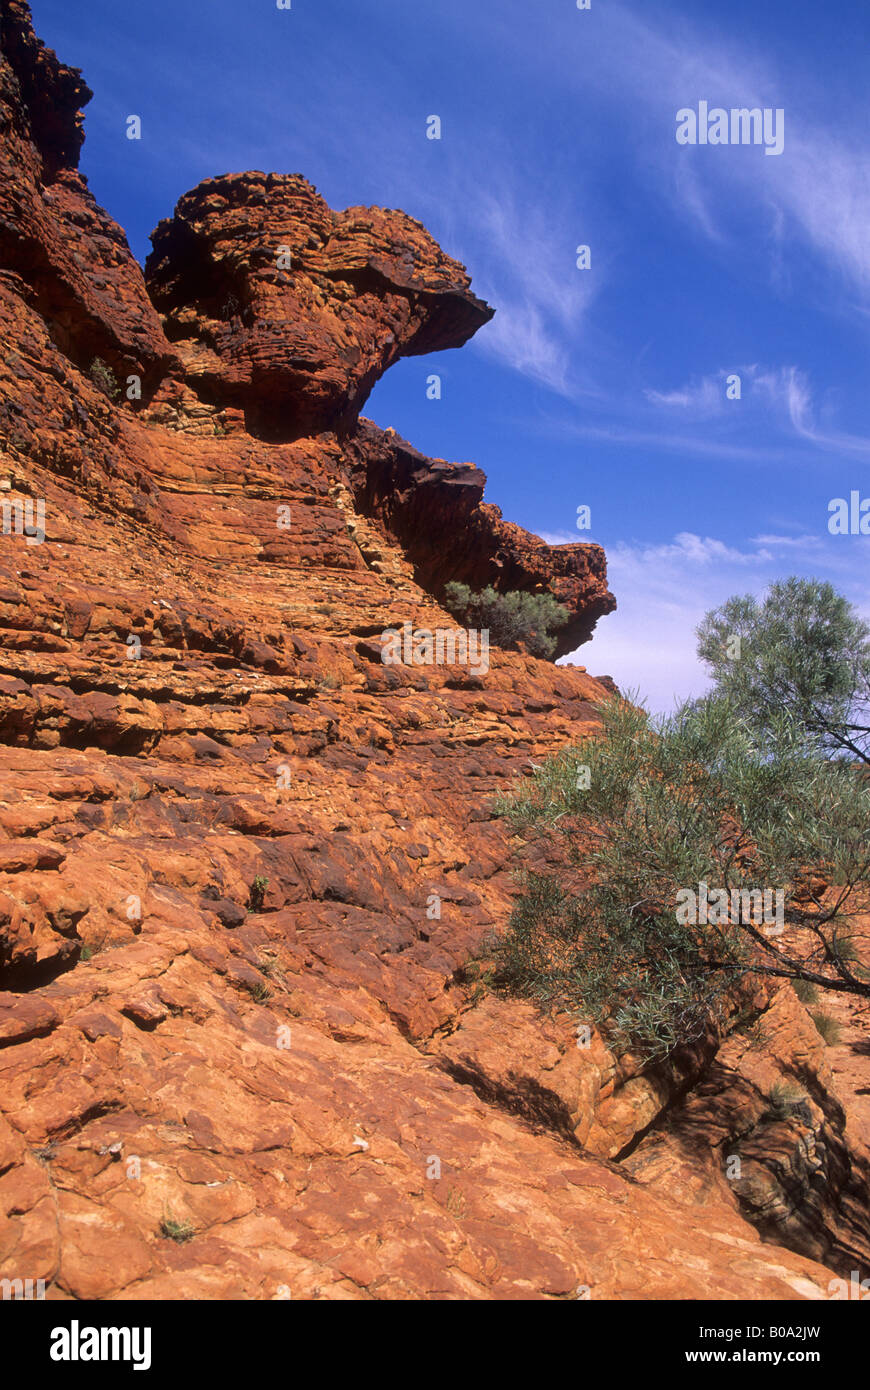 Exposed rock faces at Kings Canyon, Northern Territory, Australia. Stock Photo